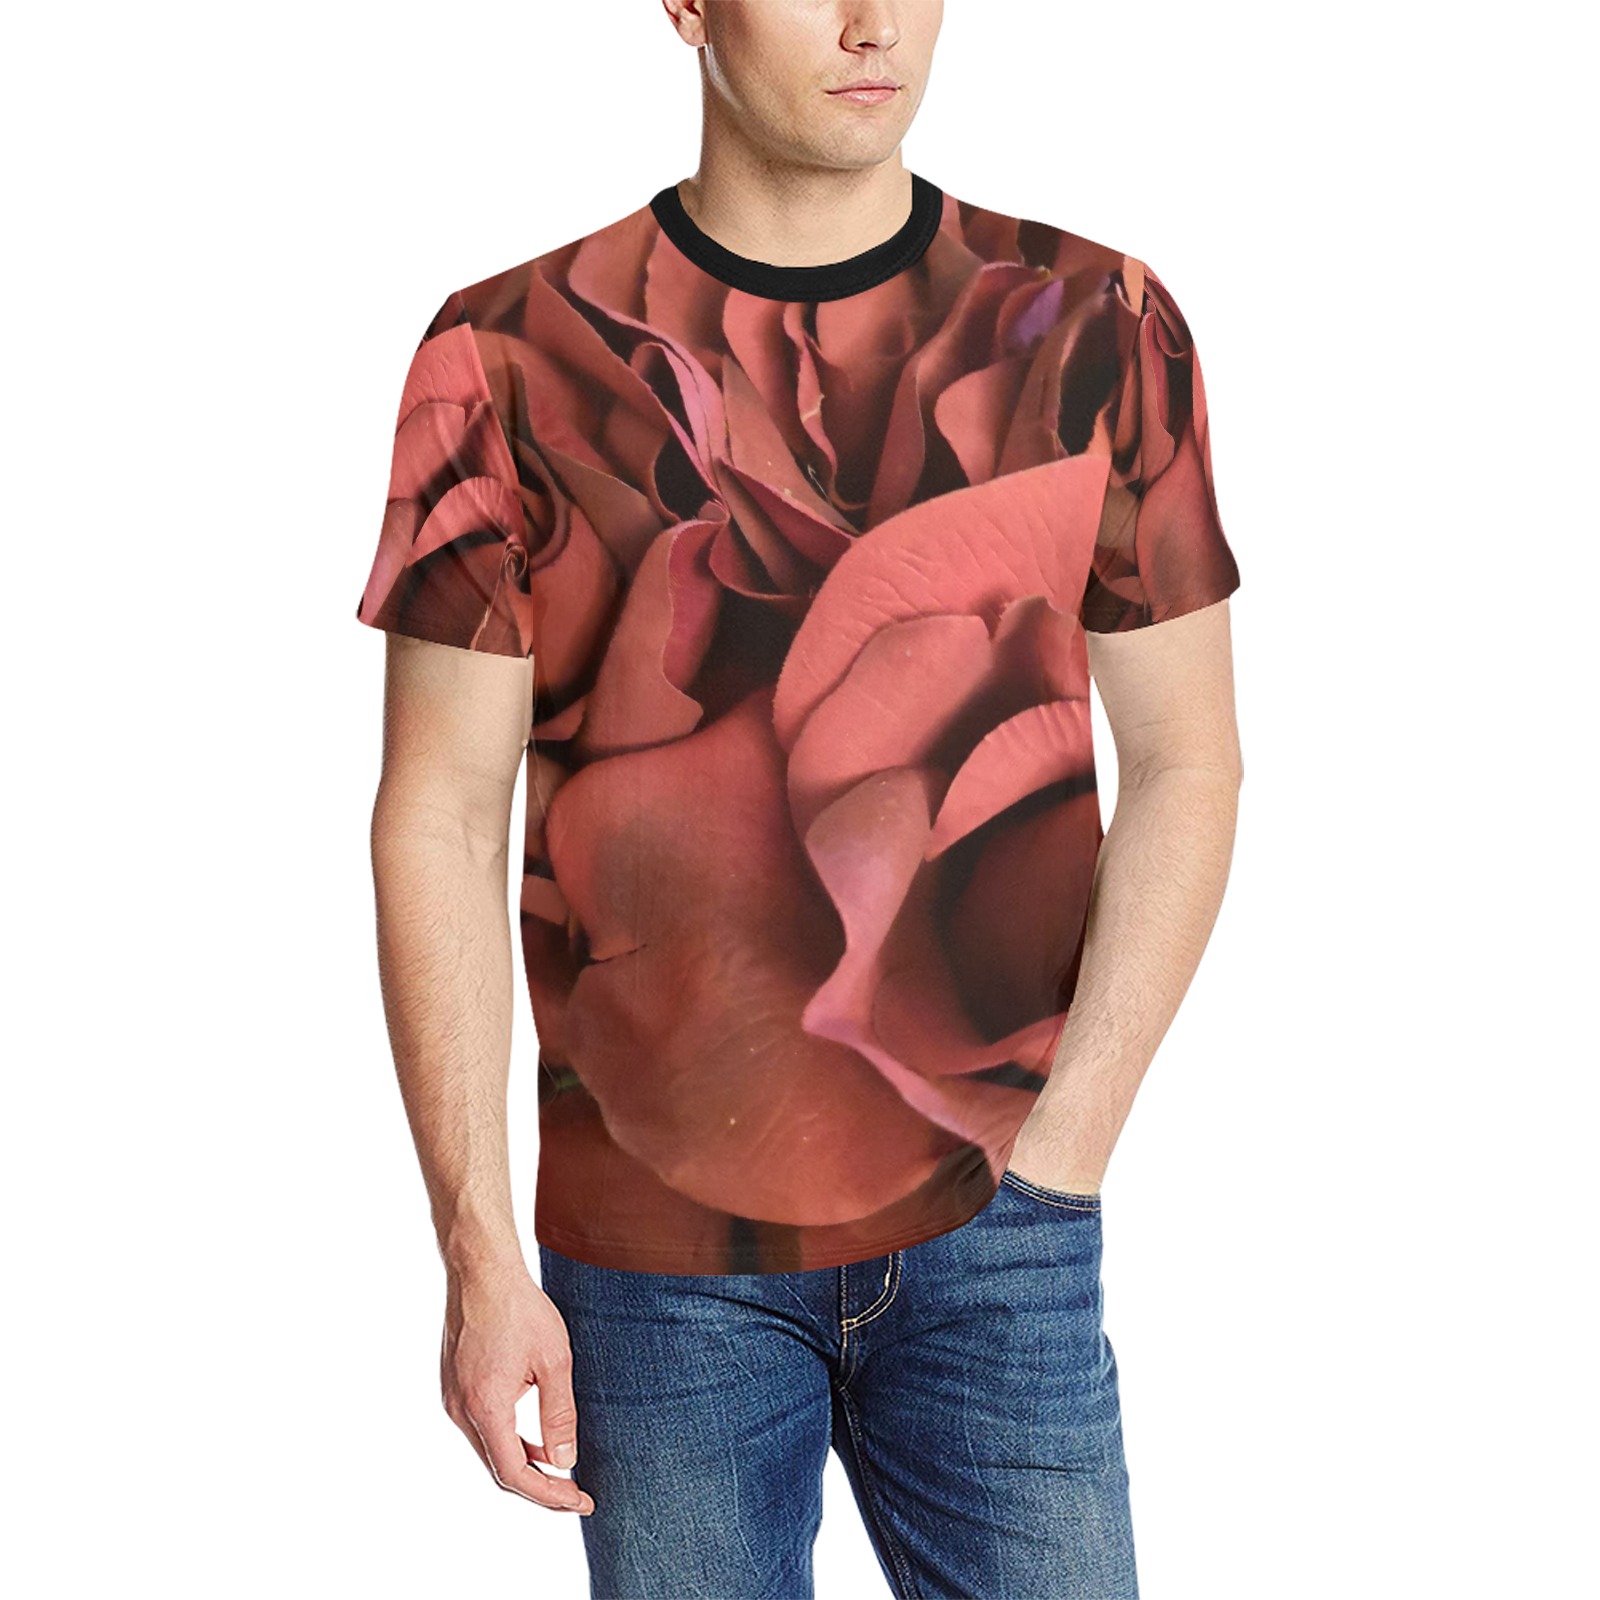 red roses Men's All Over Print T-Shirt (Solid Color Neck) (Model T63)